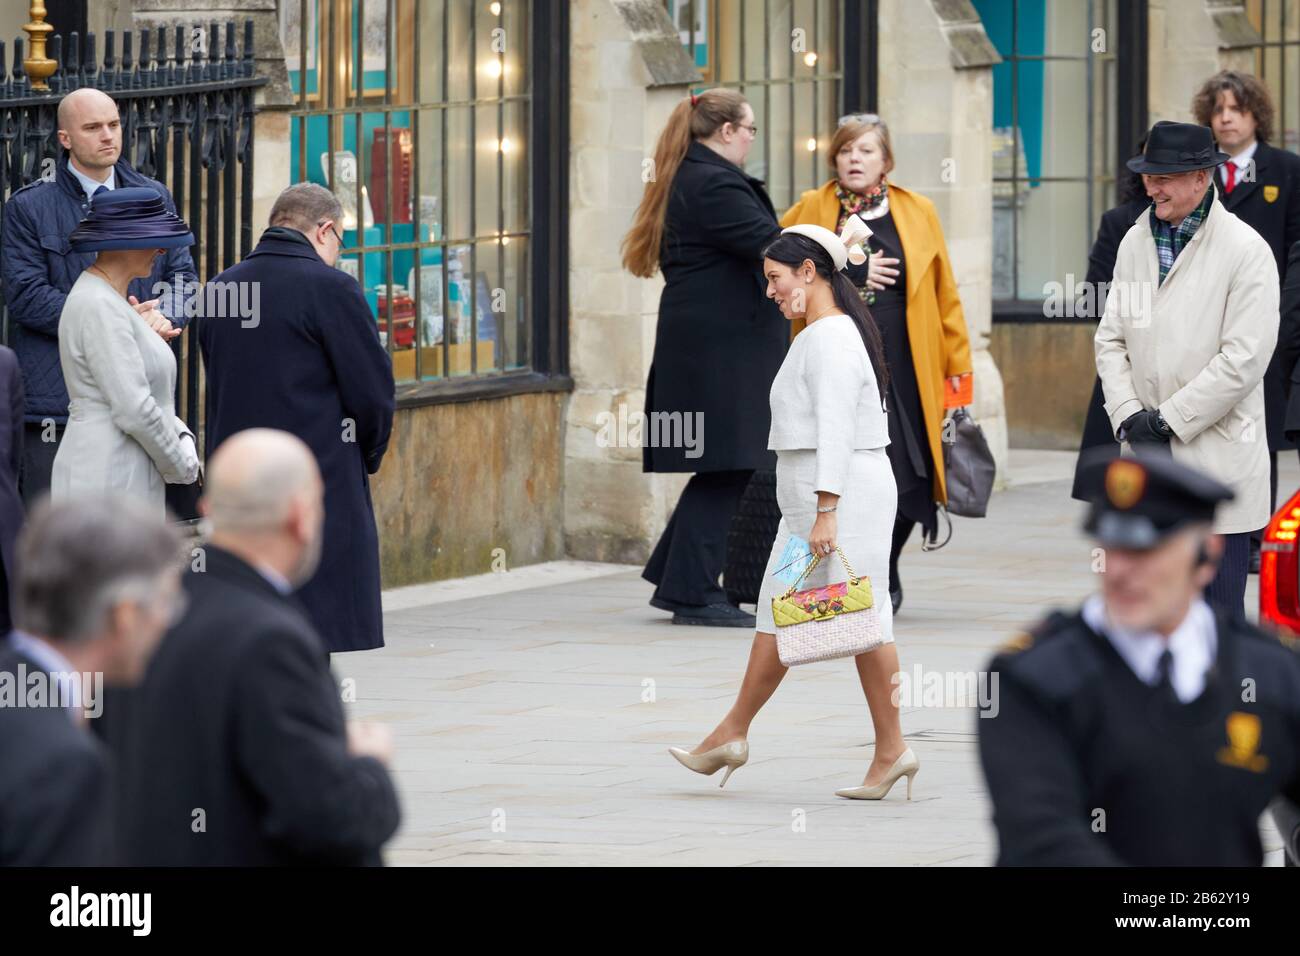 London, U.K. - 9 Mar 2020: U.K. Home Secretary Priti Patel arriving for the Commonwealth Day Service at Westminster Abbey. Stock Photo